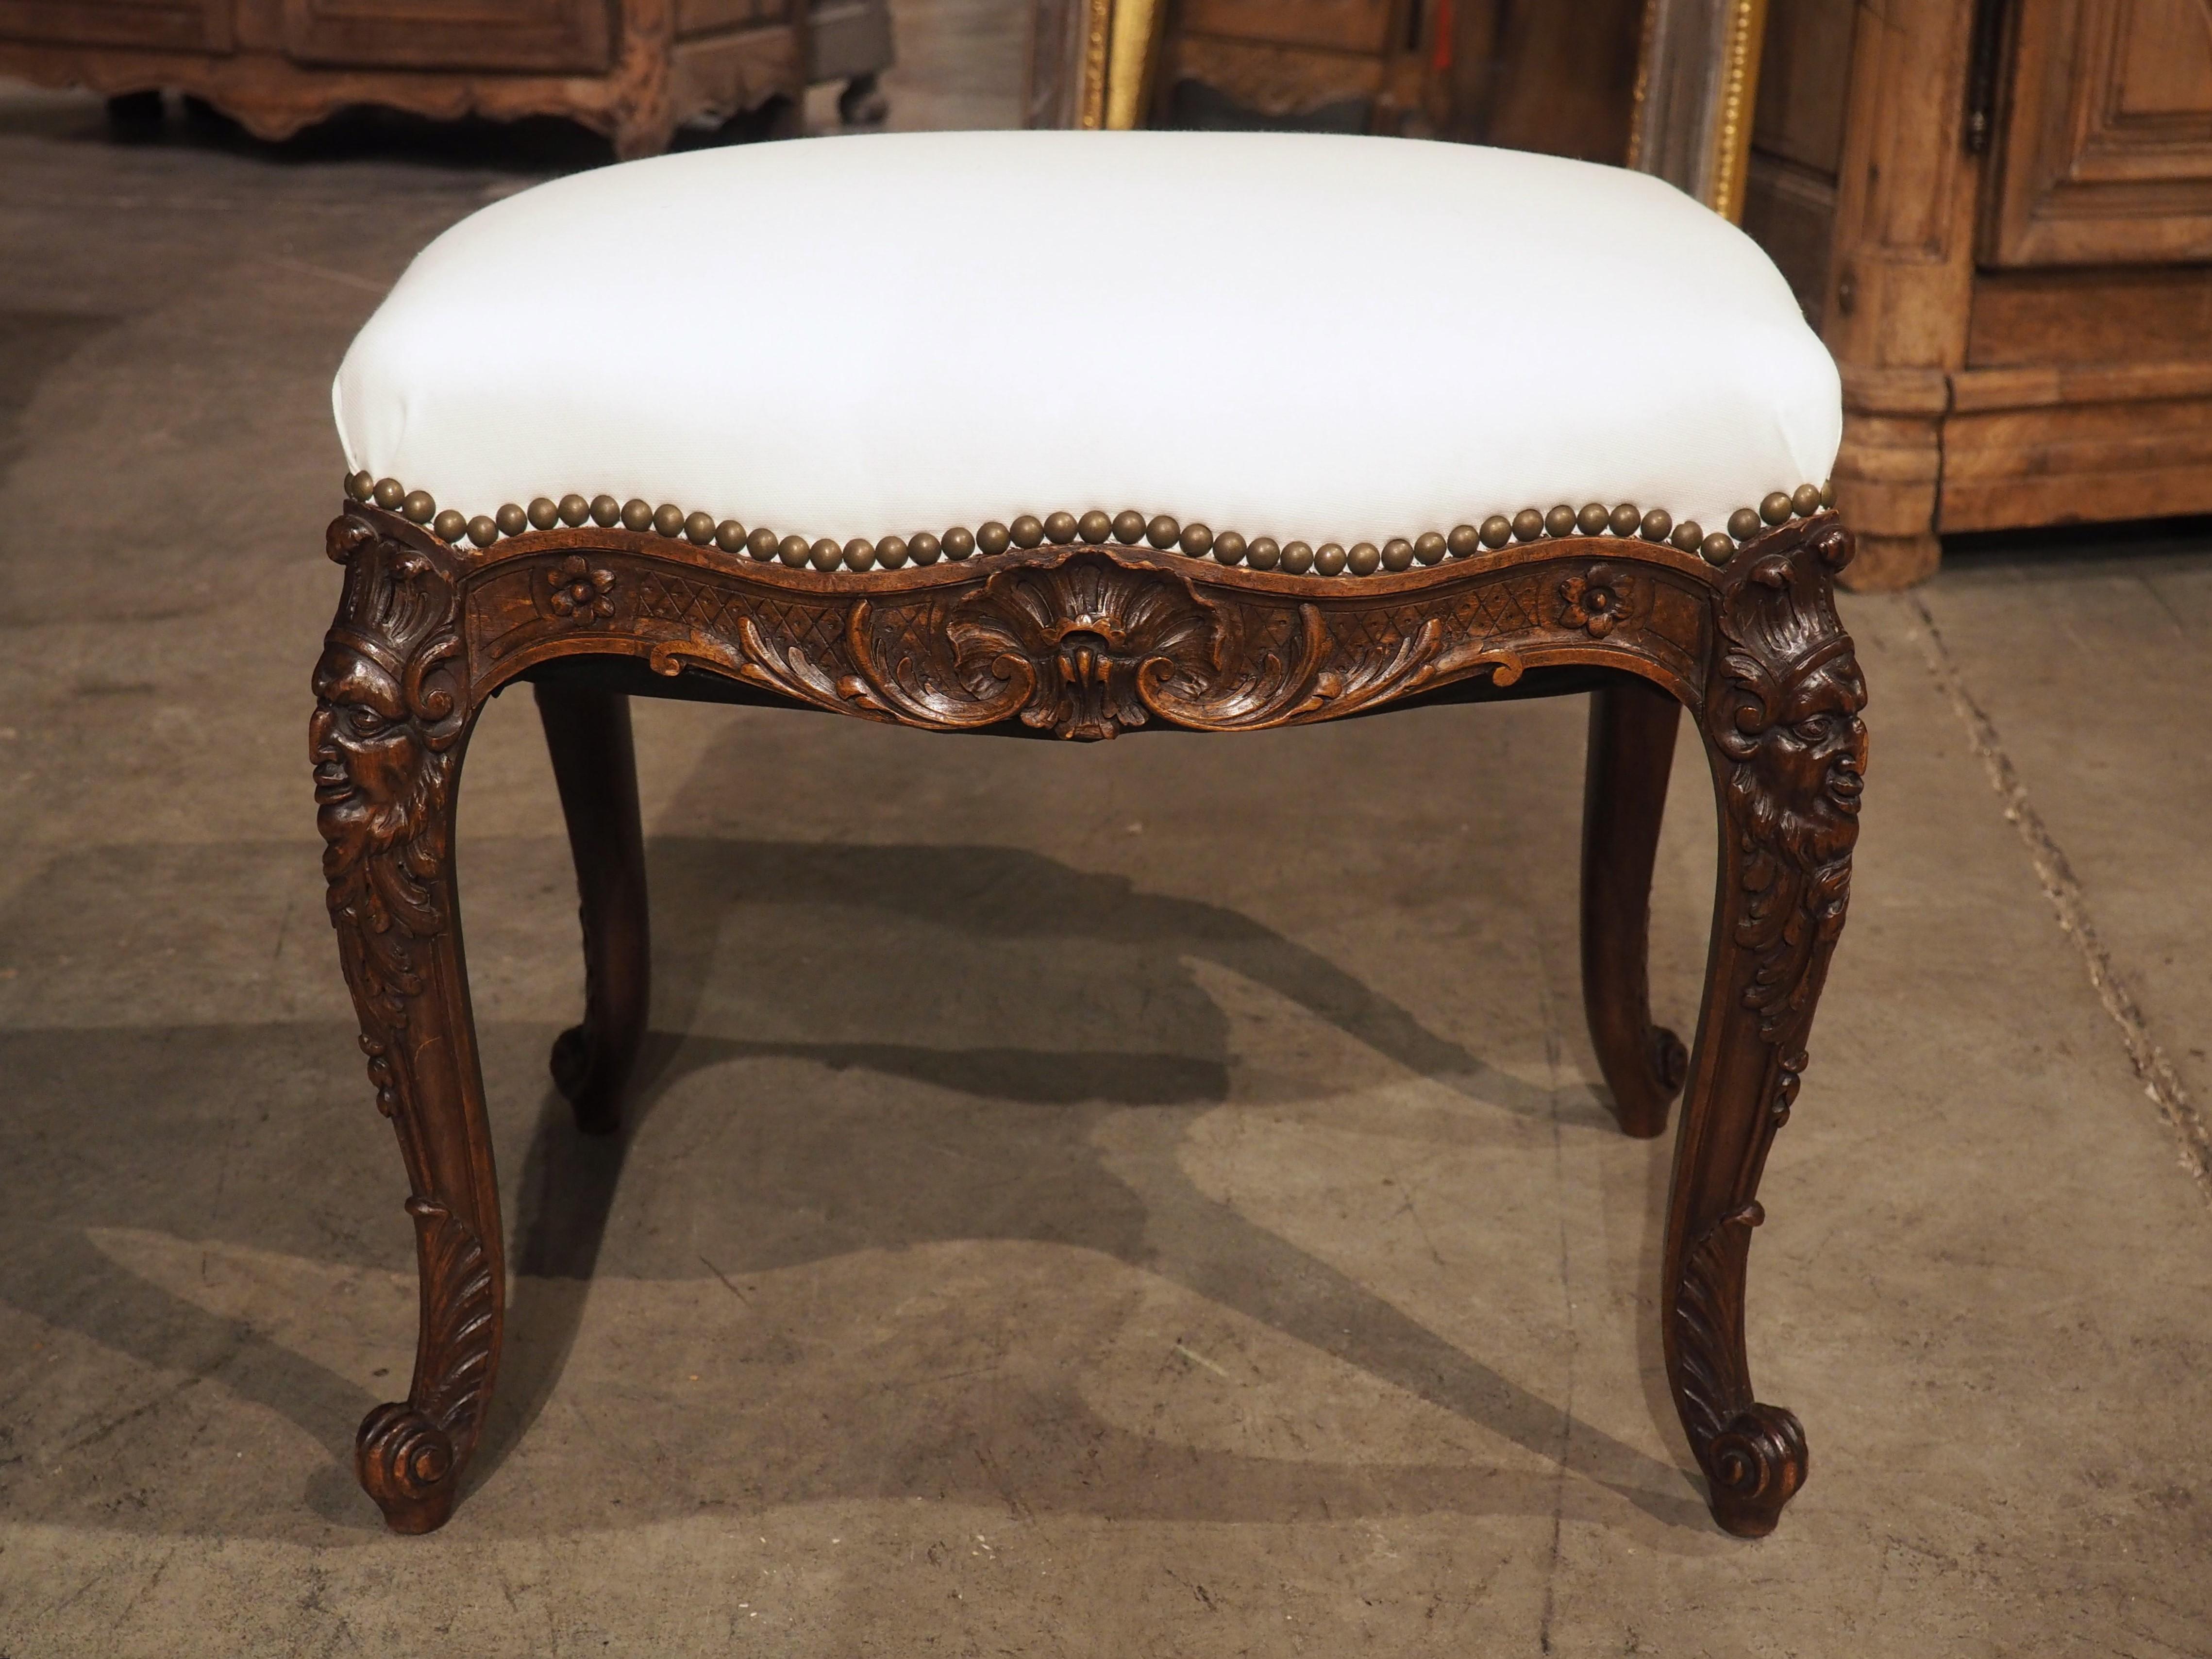 19th Century Carved Walnut Regence Style Tabouret from France In Good Condition For Sale In Dallas, TX